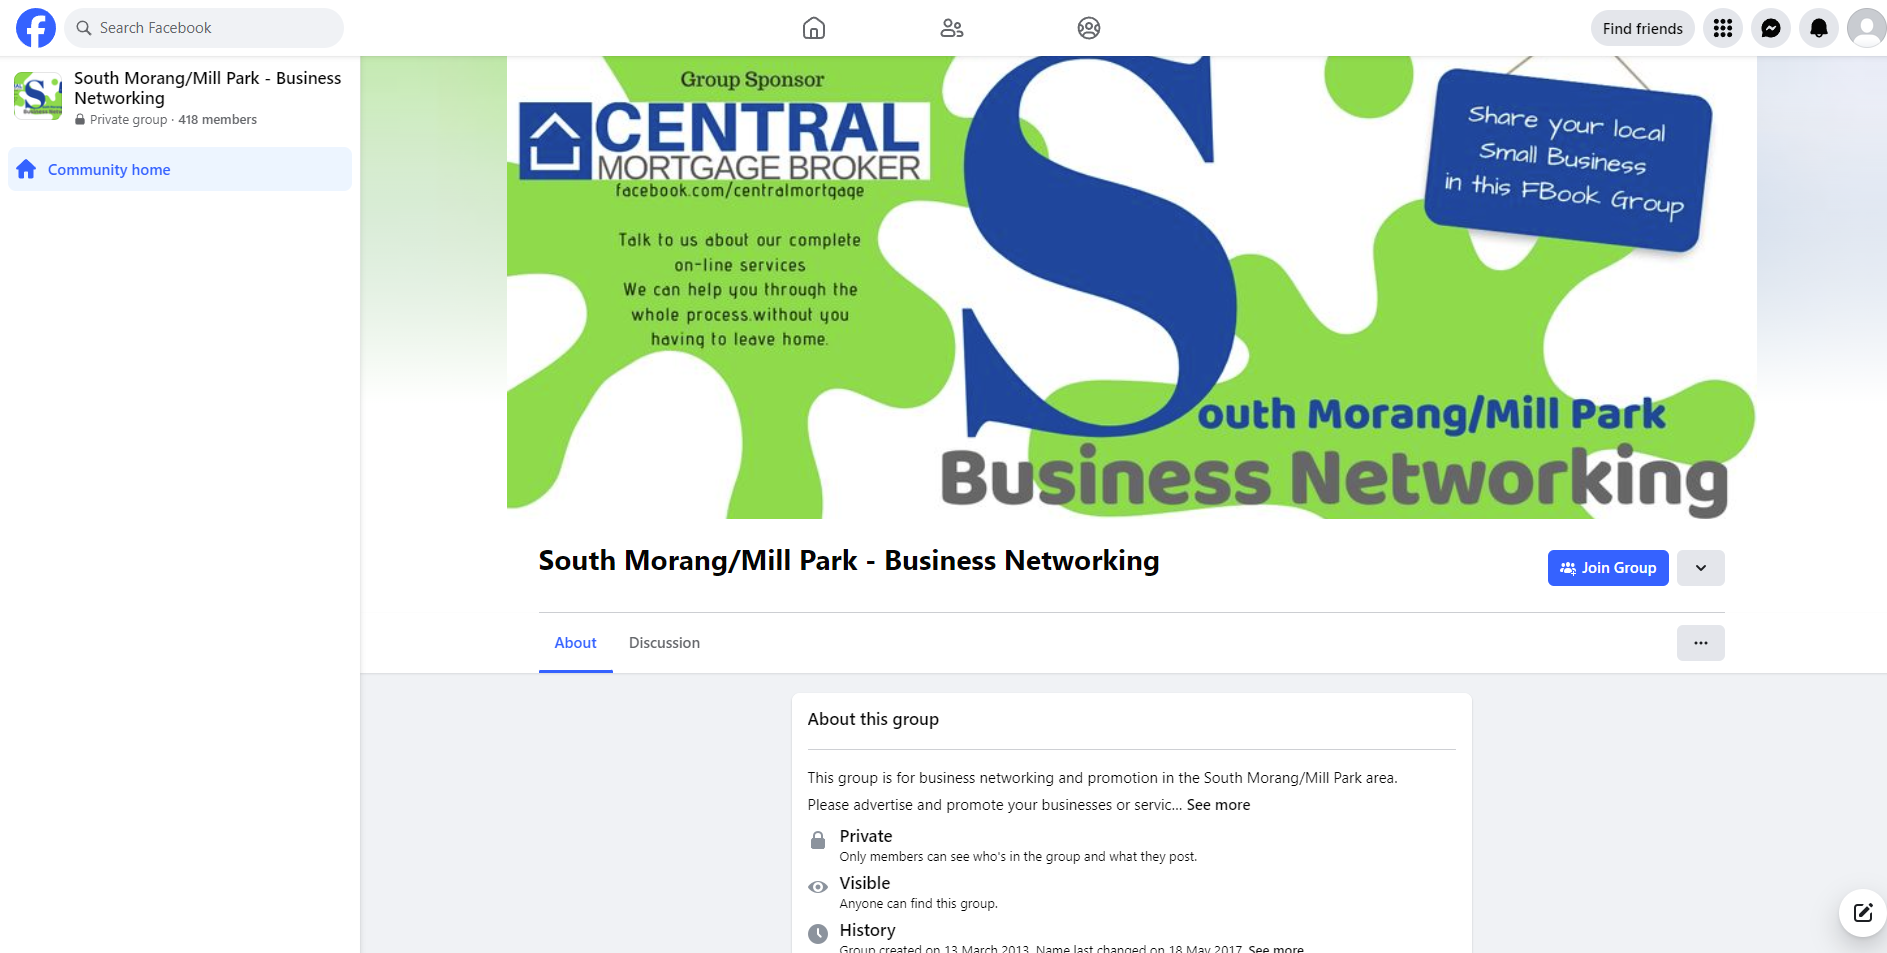 South Morang/Mill Park - Business Networking